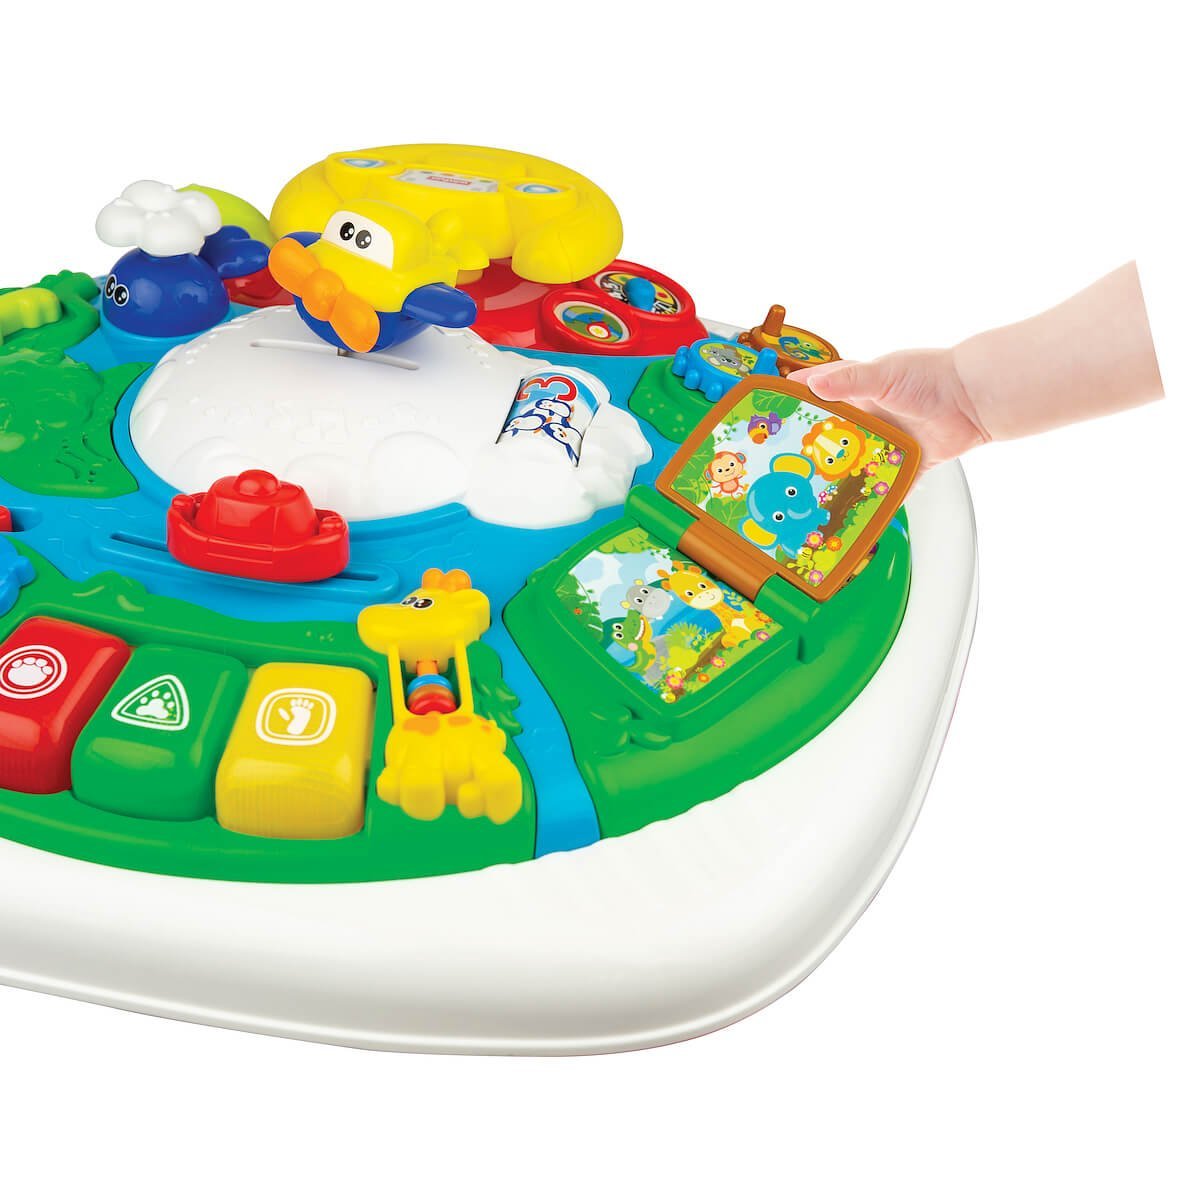 Winfun - Globetrotter Activity Table